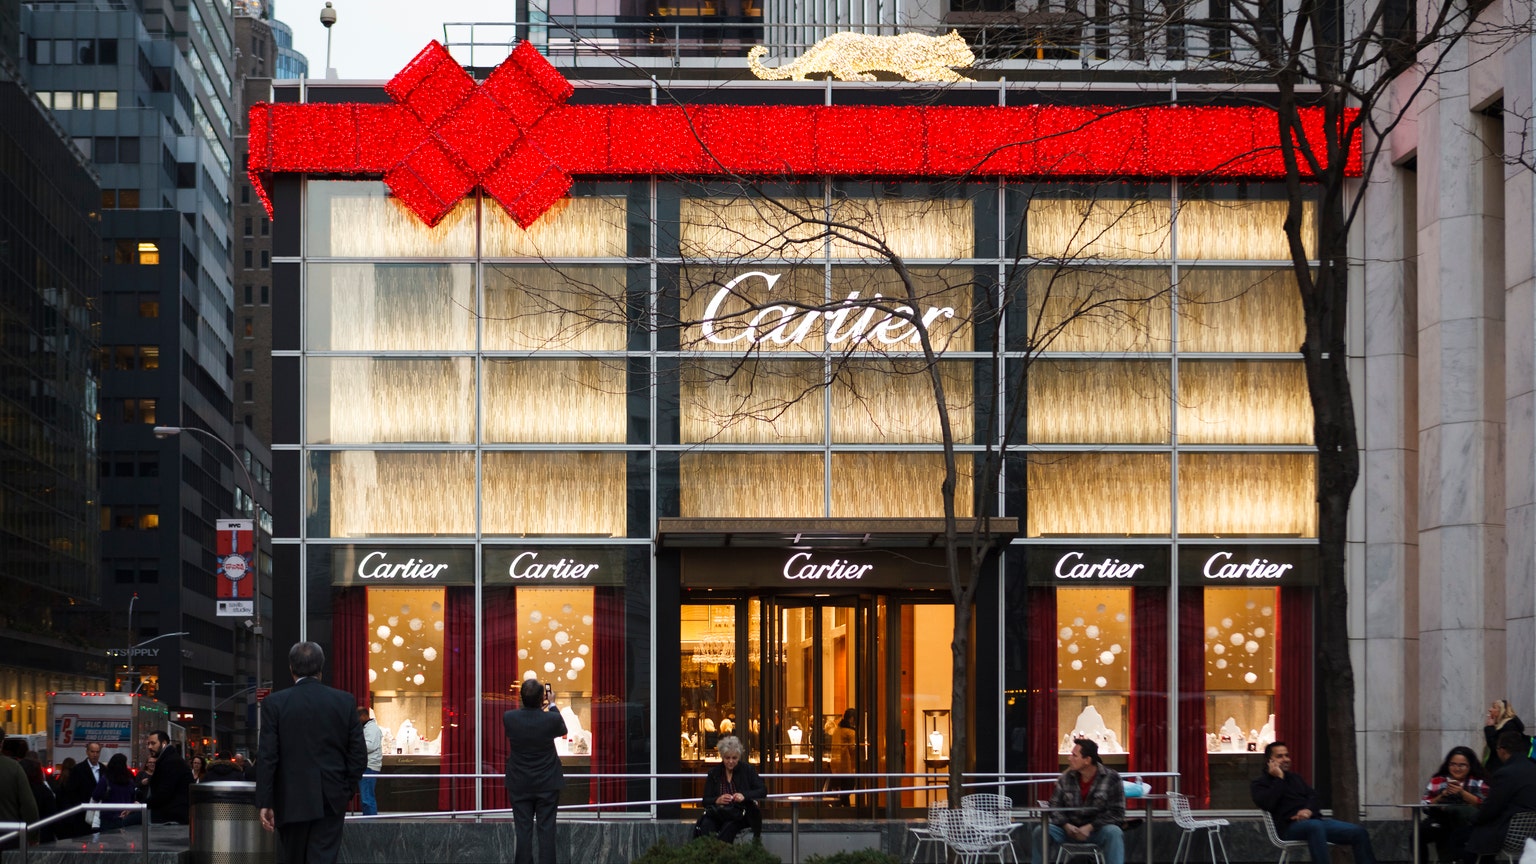 Cartier Luxury Jewelry Store Front in the Street Editorial Stock